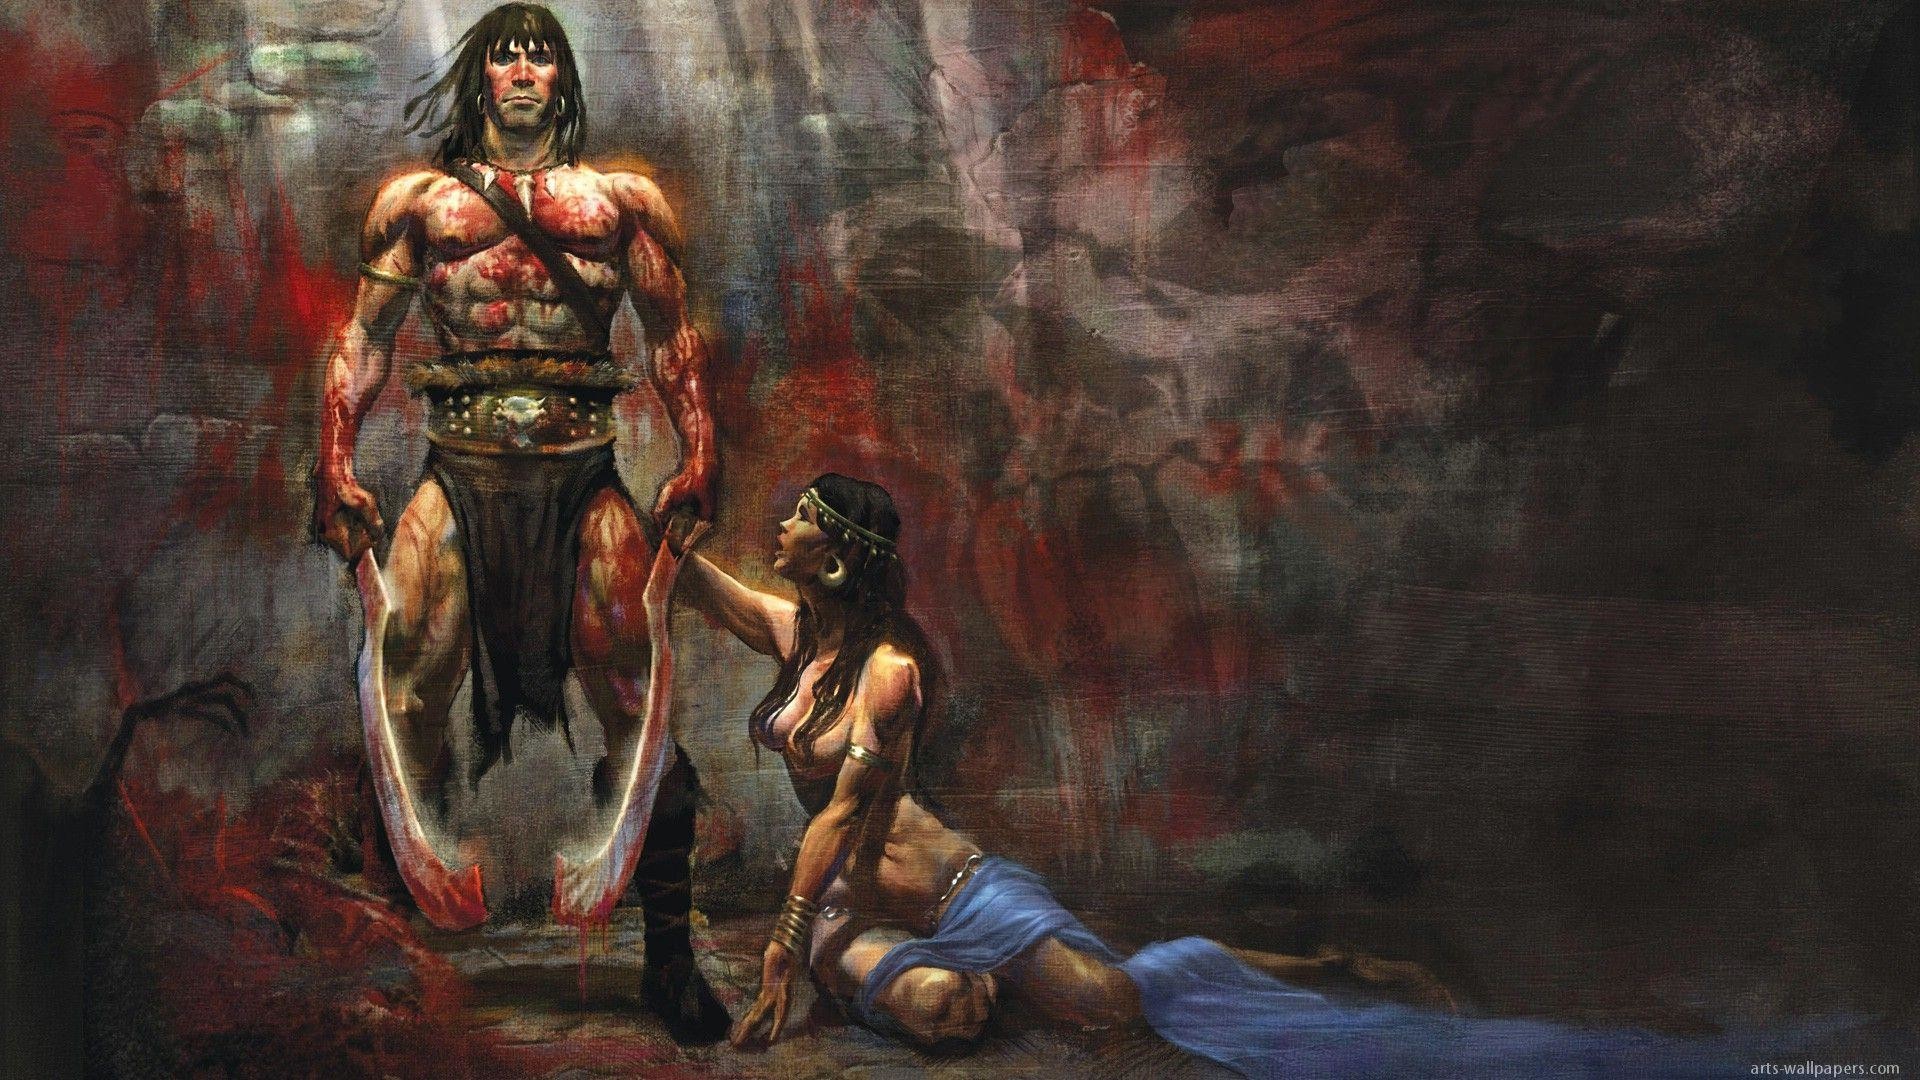 1920x1080 Conan The Barbarian Wallpaper Images & Pictures - Becuo